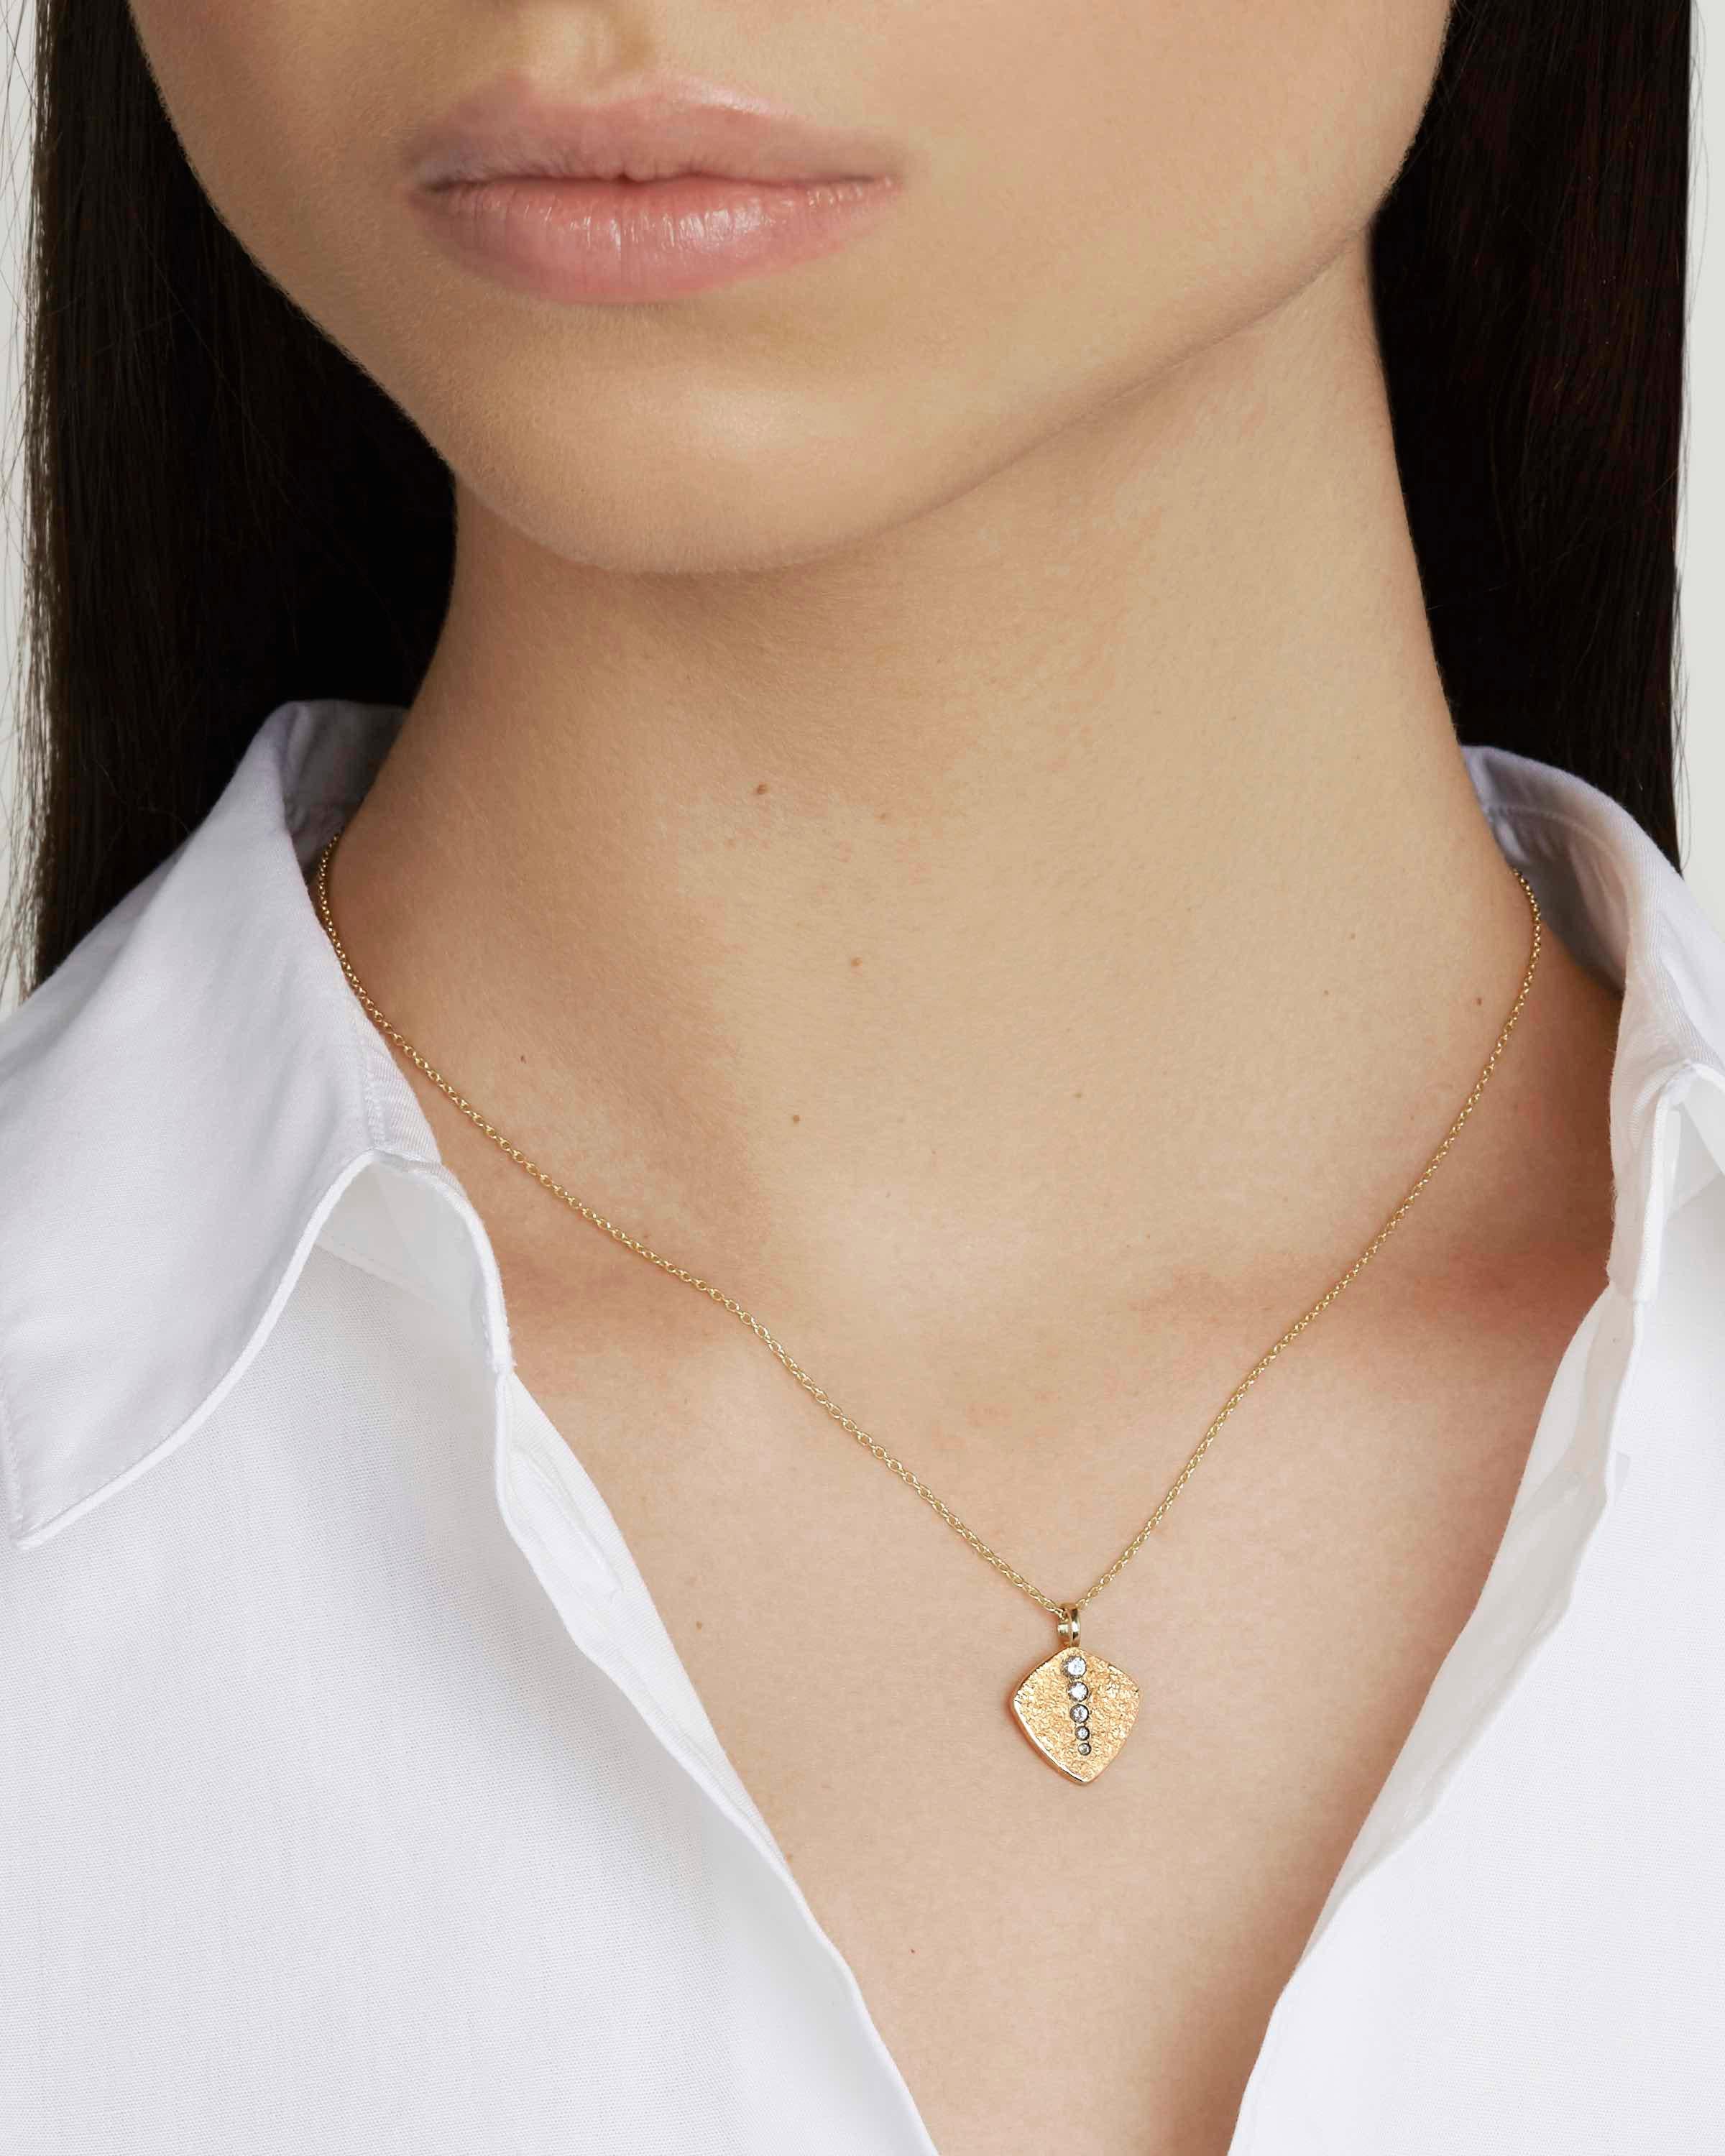 This delicate, sparkling pendant necklace features five white diamonds graduated in size to emphasise the organic, leaflike shape of the pendant.  Each diamond is H color, VS1 clarity.  Crafted in solid 9-carat yellow gold, the pendant has our